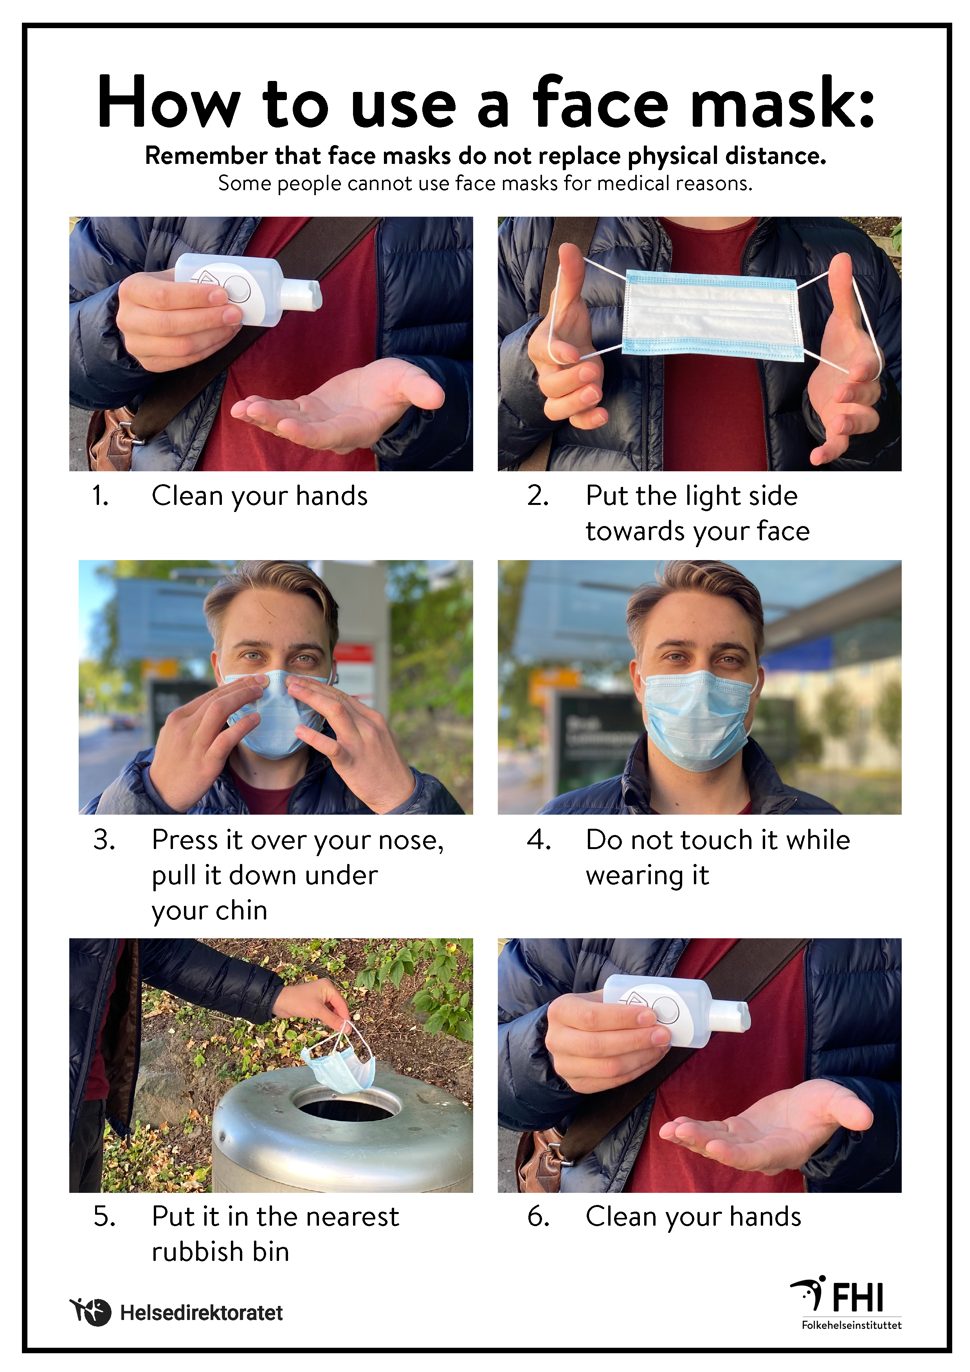 poster on how to use a face mask